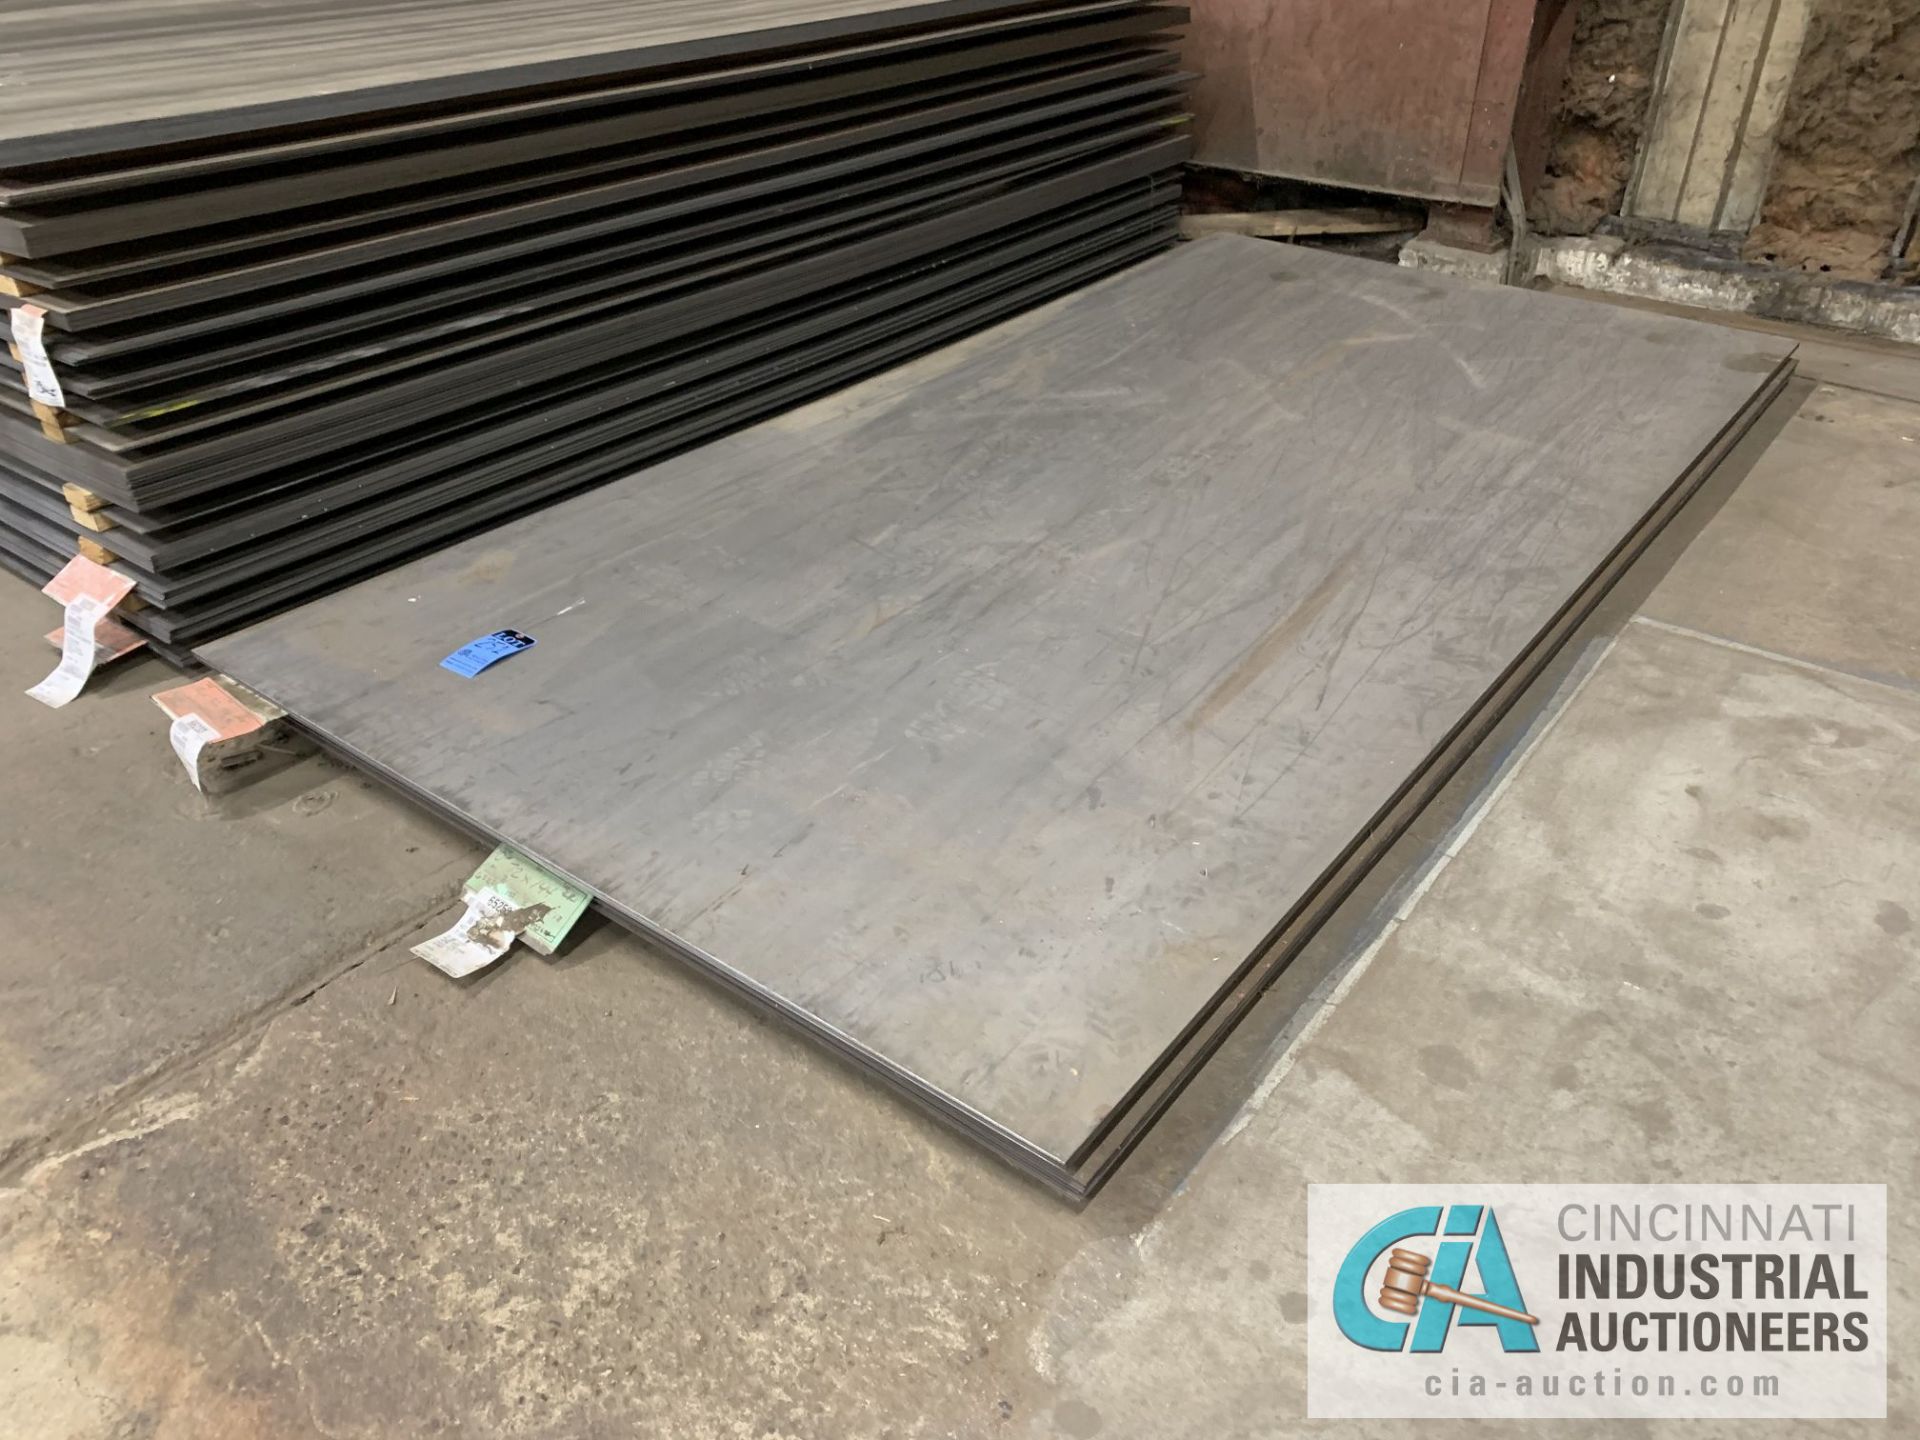 (LOT) APPROX. 6,668 LBS. UNCOATED SHEET STEEL, 1-STACK, 2-BUNDLES, SEE INVENTORY FOR LISTING.